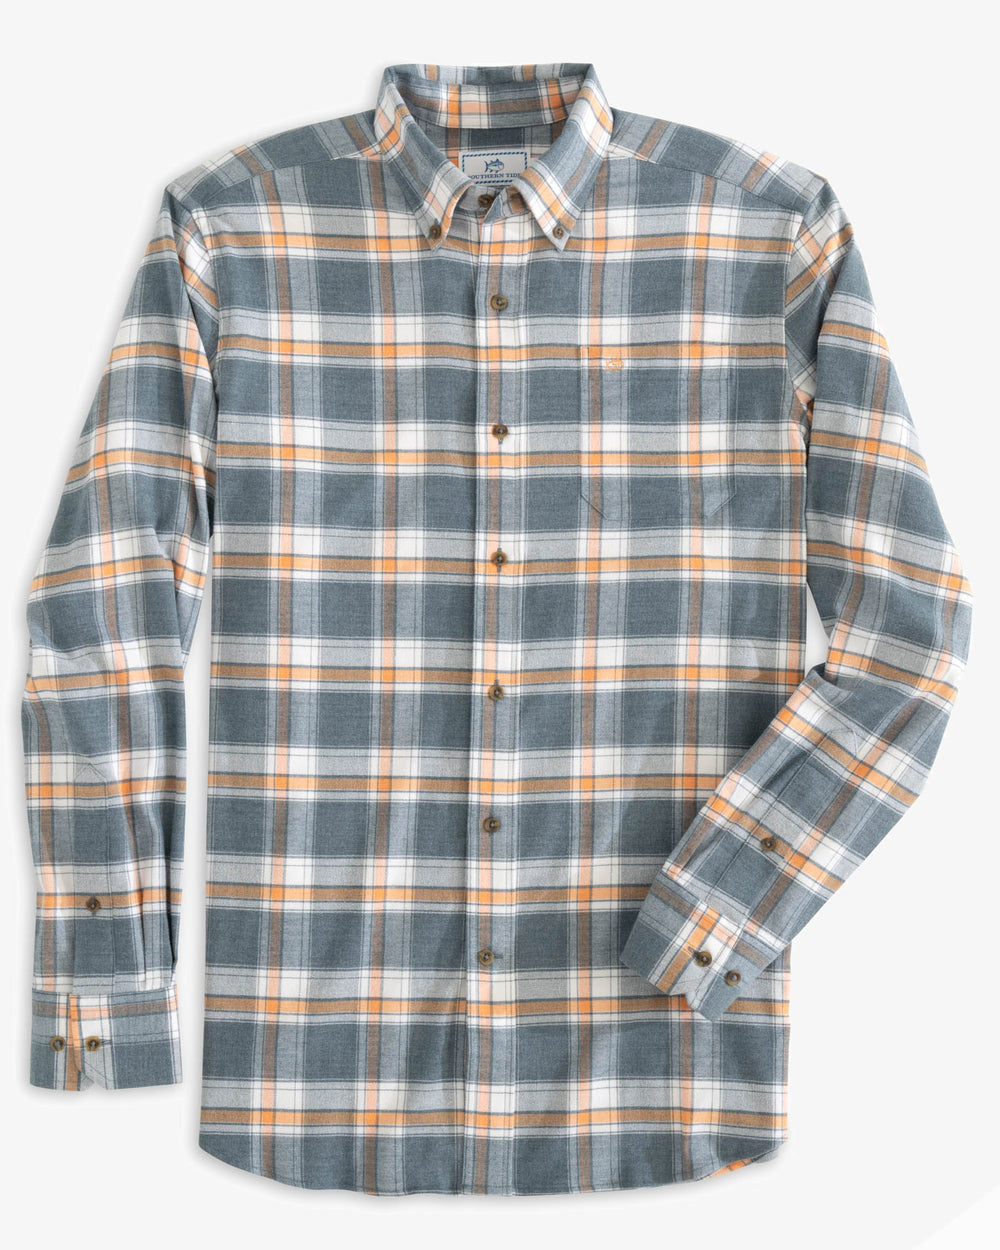 The front view of the Milton Plaid Intercoastal Flannel Sport Shirt by Southern Tide - Heather Dark Denim